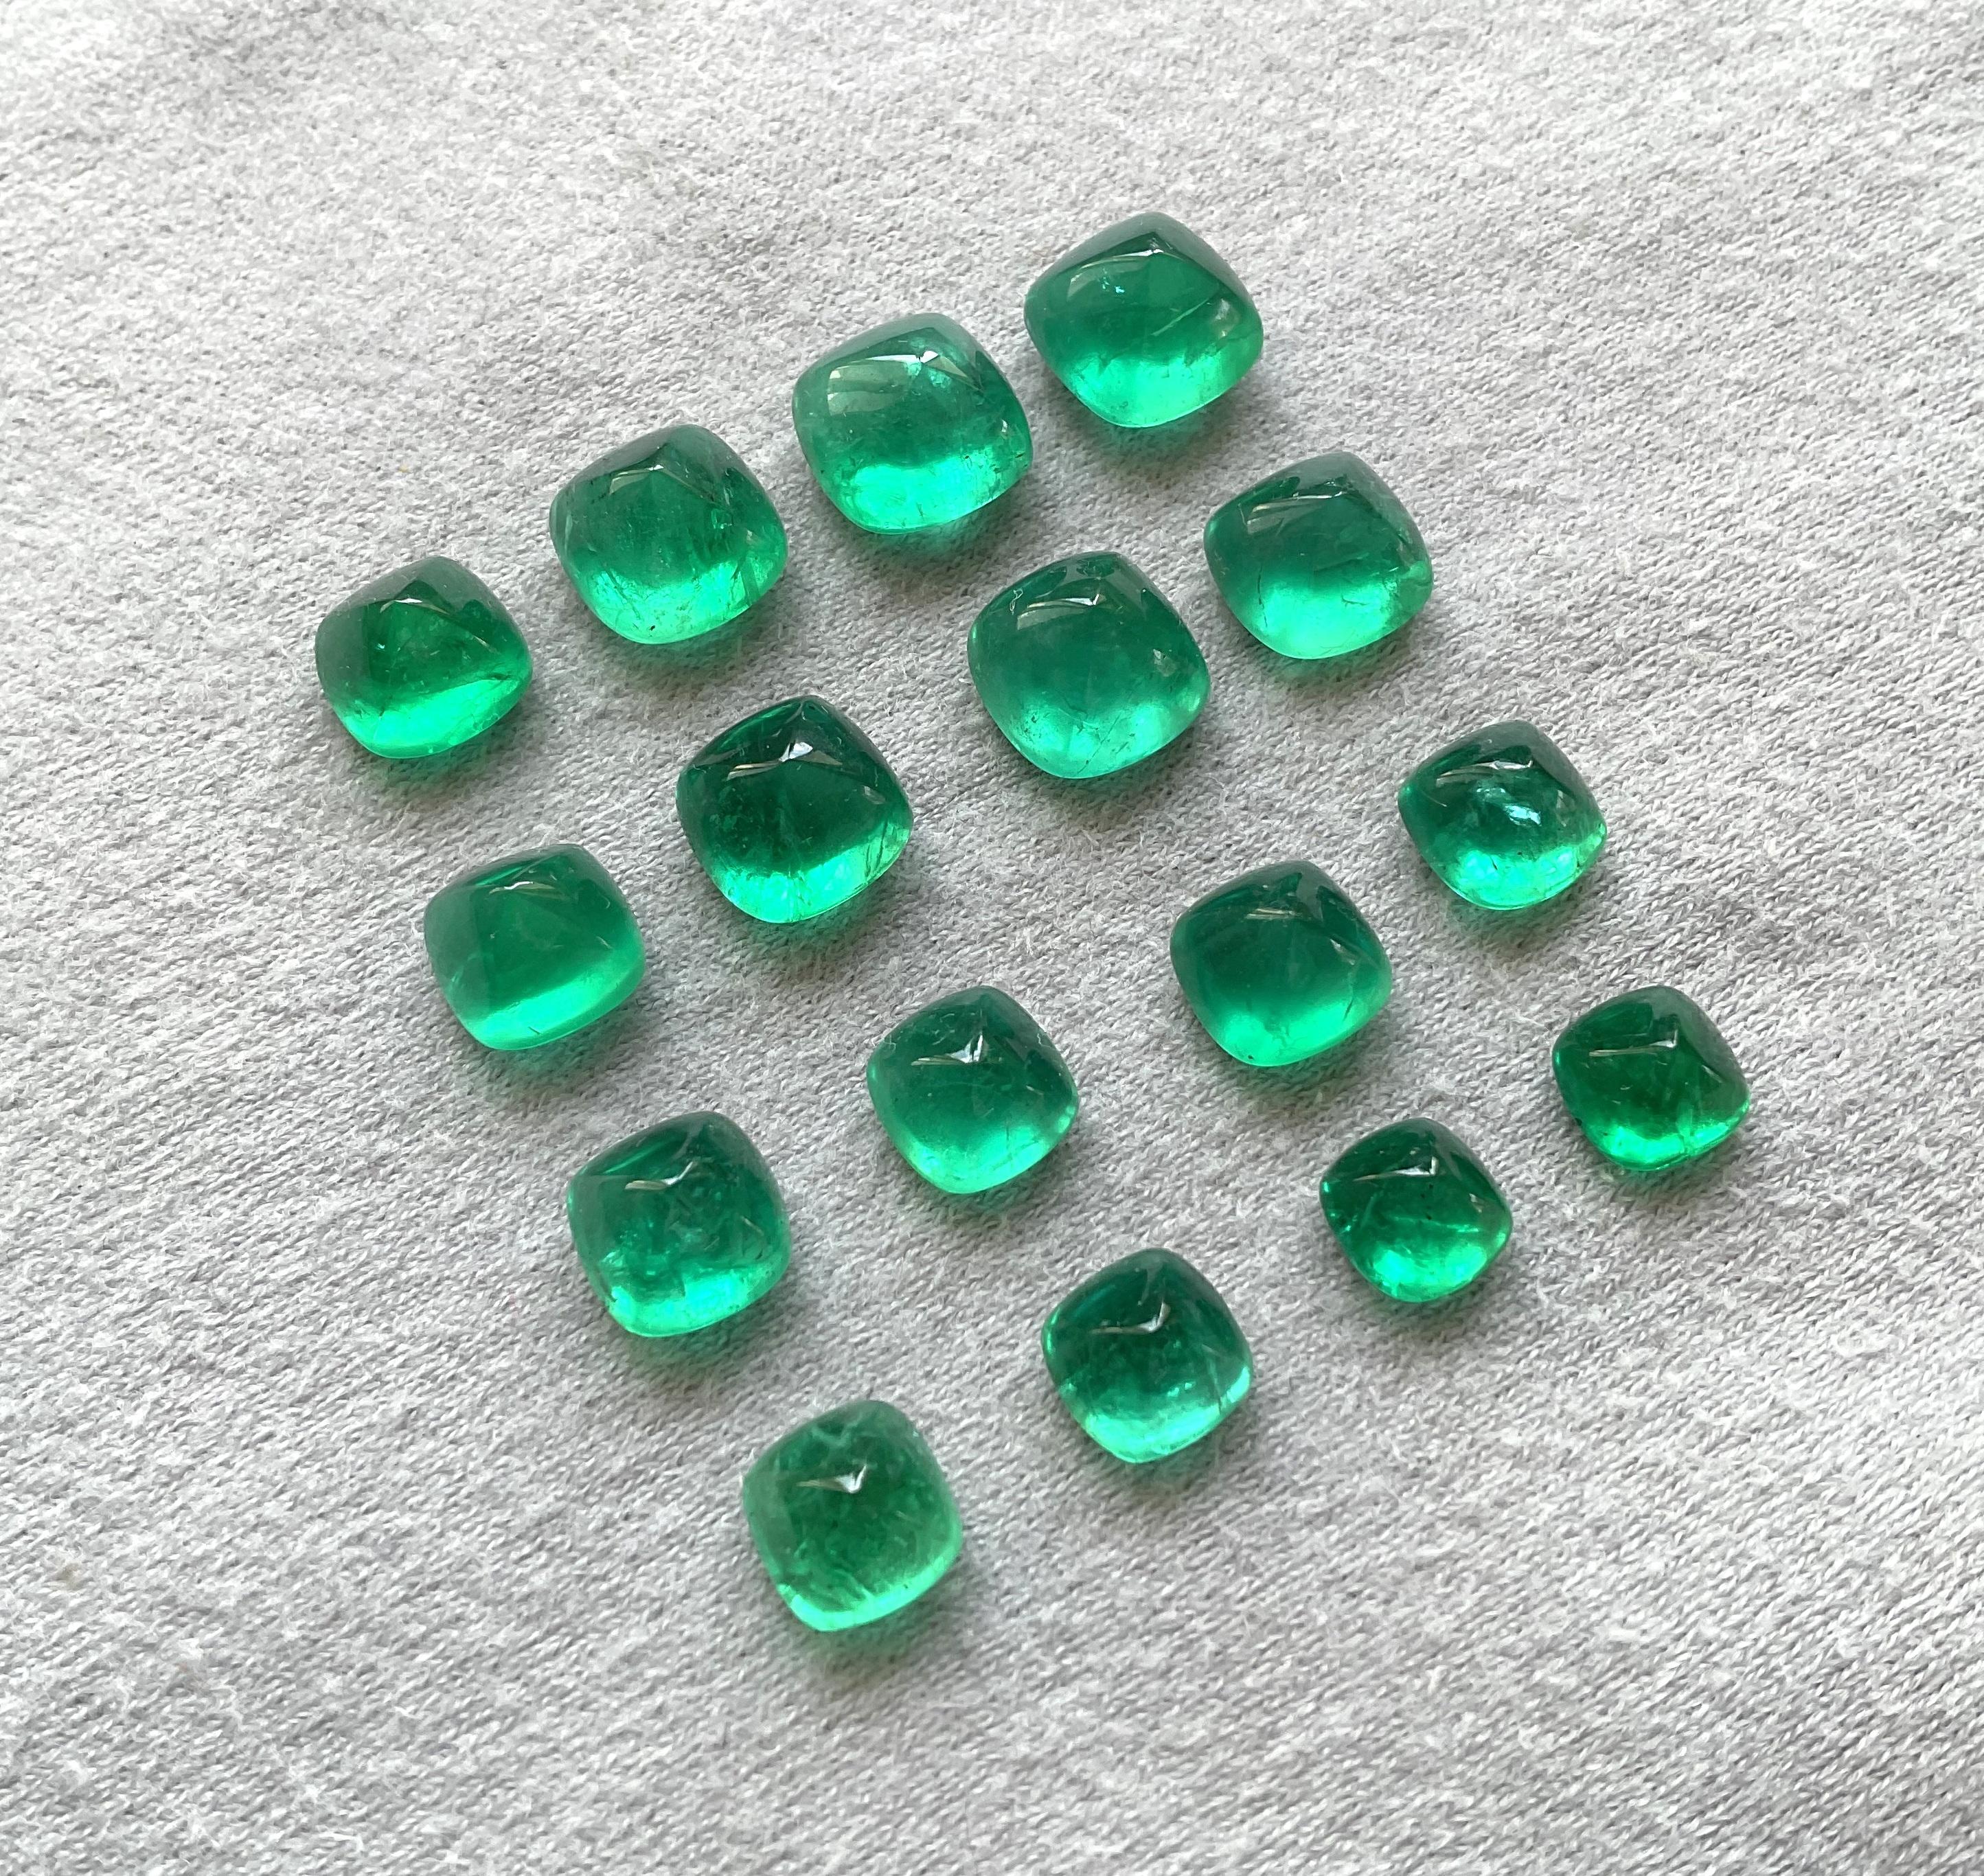 59.30 Carats Zambian Emerald Sugarloaf Cabochon Lot Top Quality Natural Gemstone For Sale 5